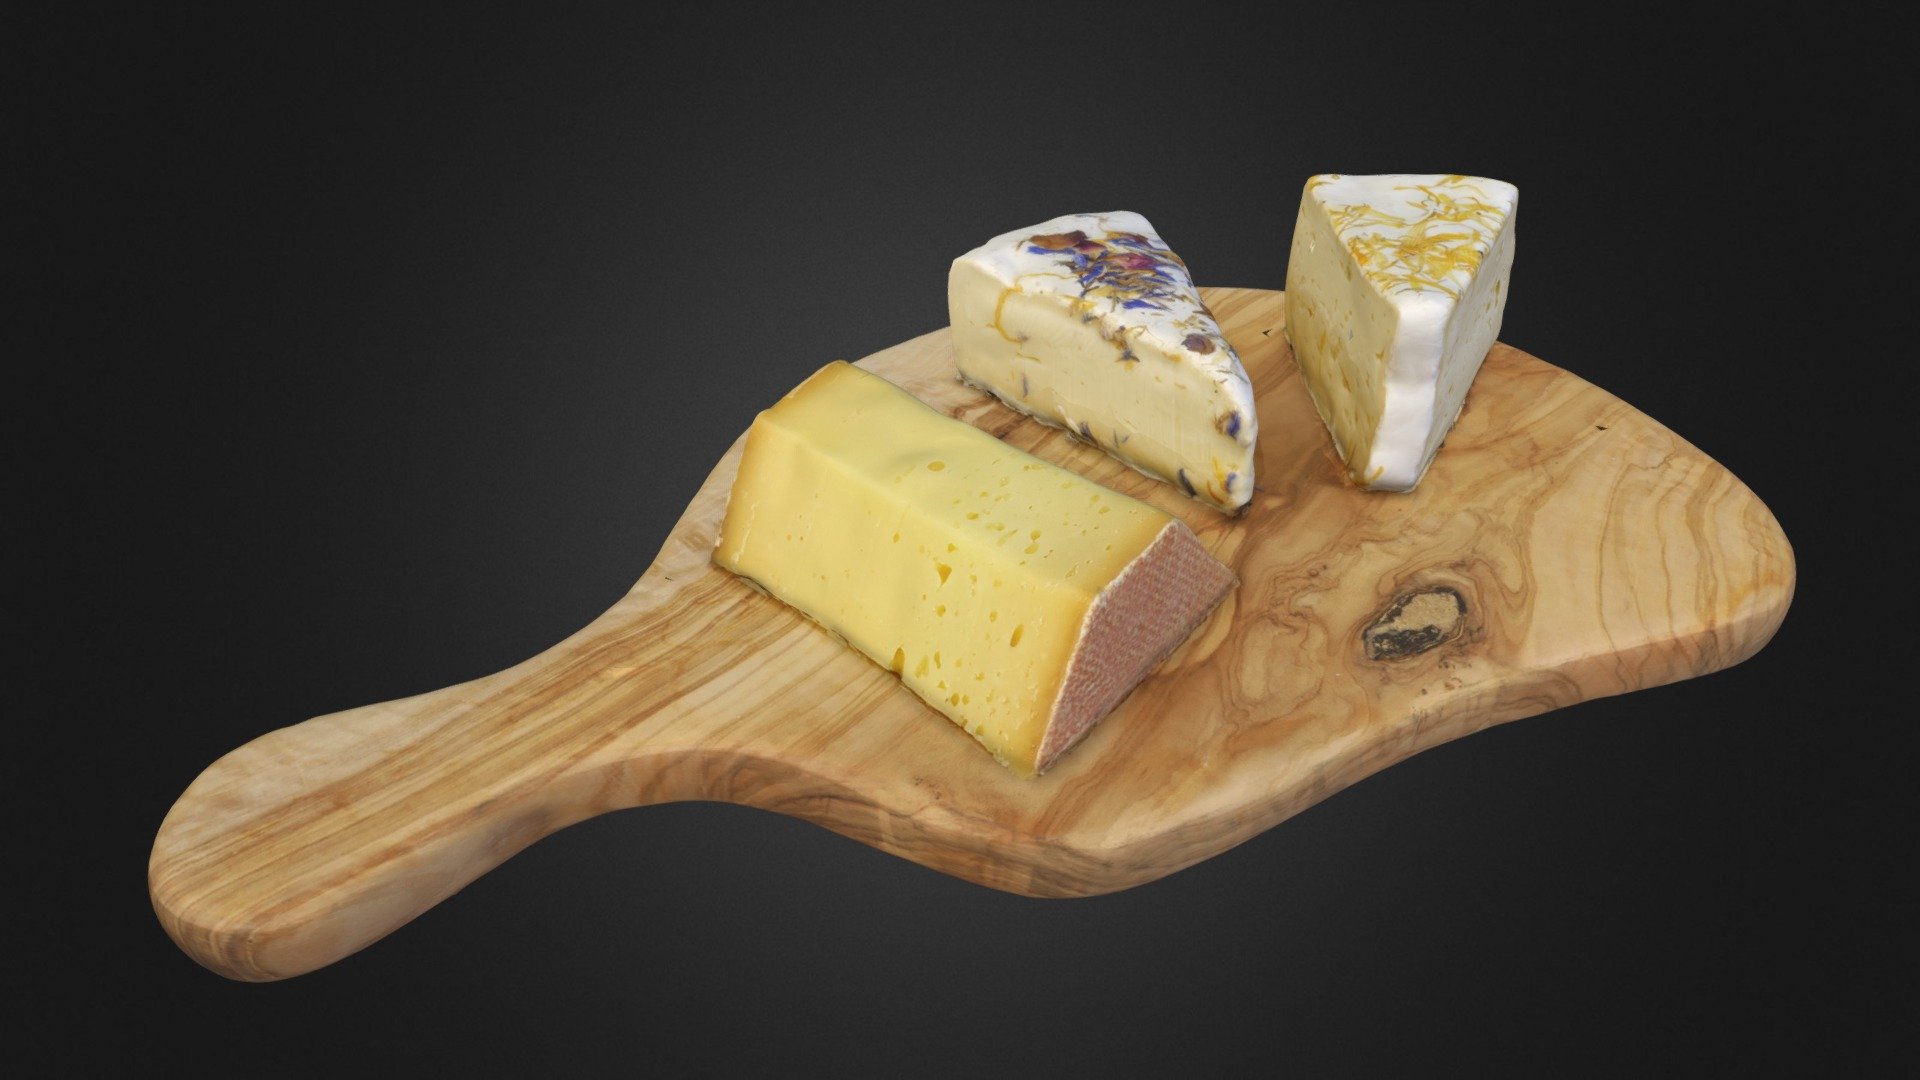 Its sunday morning. You invite some good friends over. You're all going to have a delicious breakfast. But at first, you have to 3D scan all the cheese! :D - Sunday breakfast cheese board - Buy Royalty Free 3D model by Sikozu 3d model